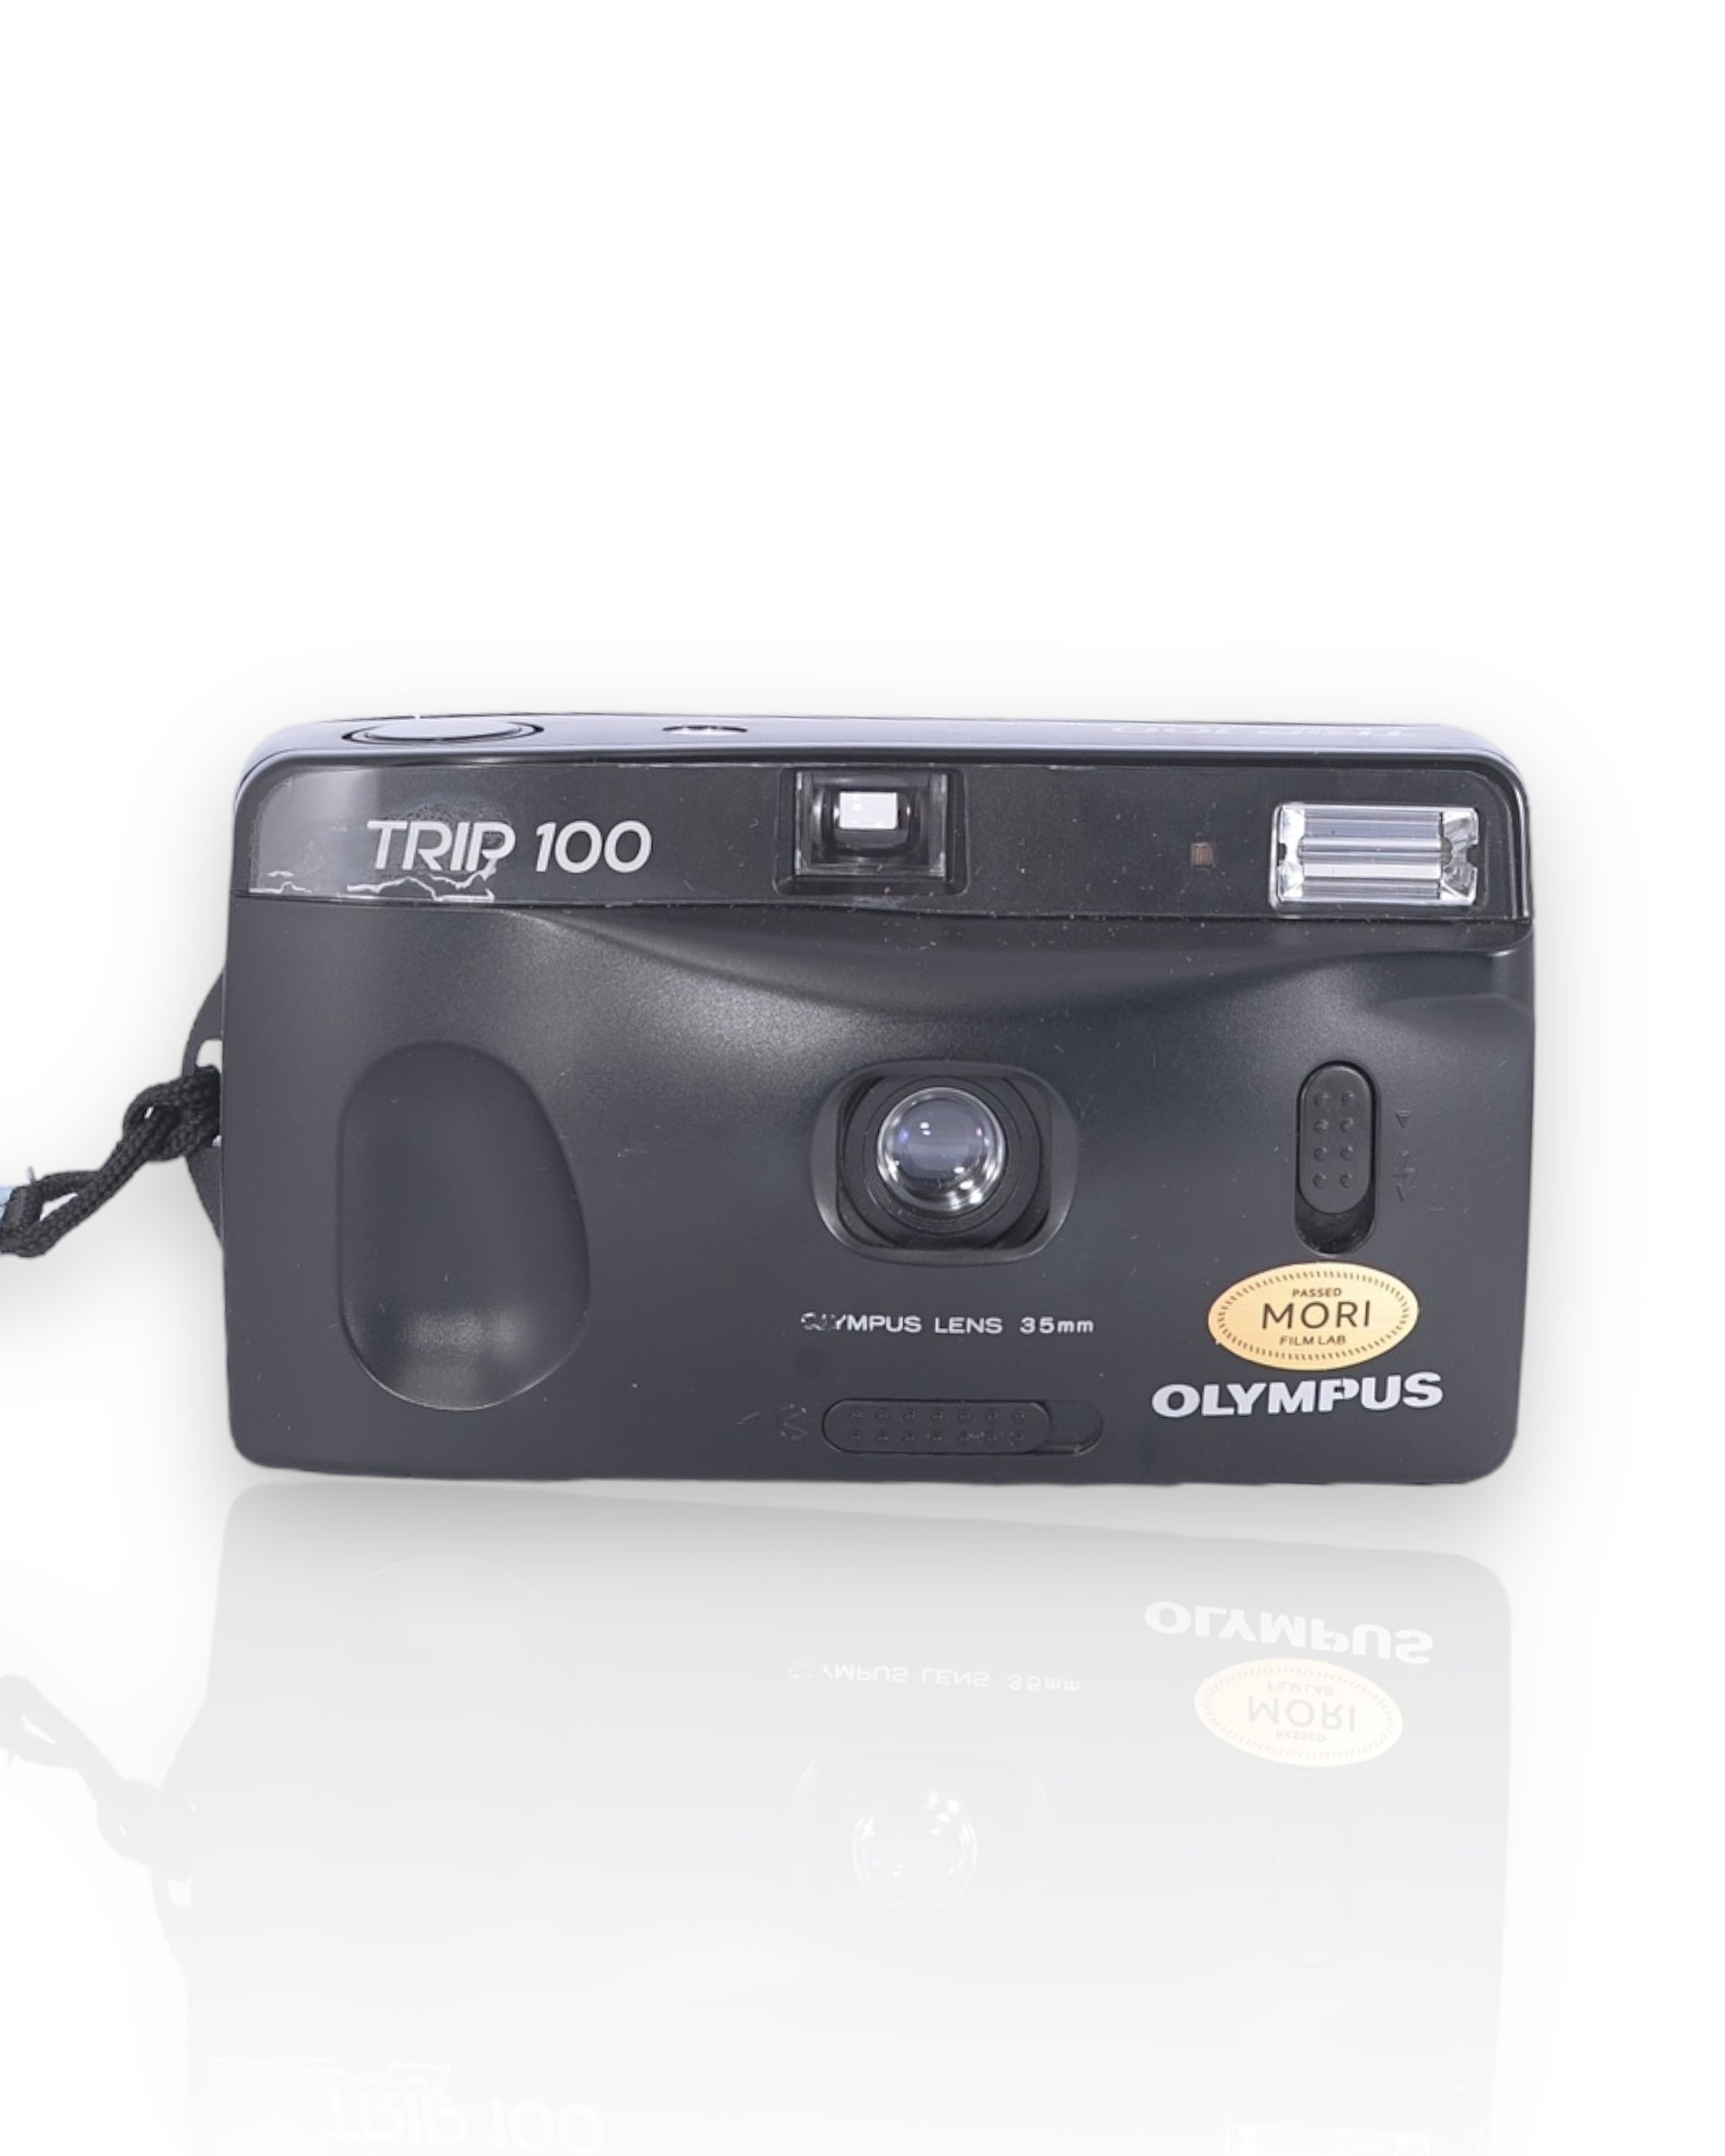 Olympus Trip 100 35mm point & shoot camera with 35mm lens